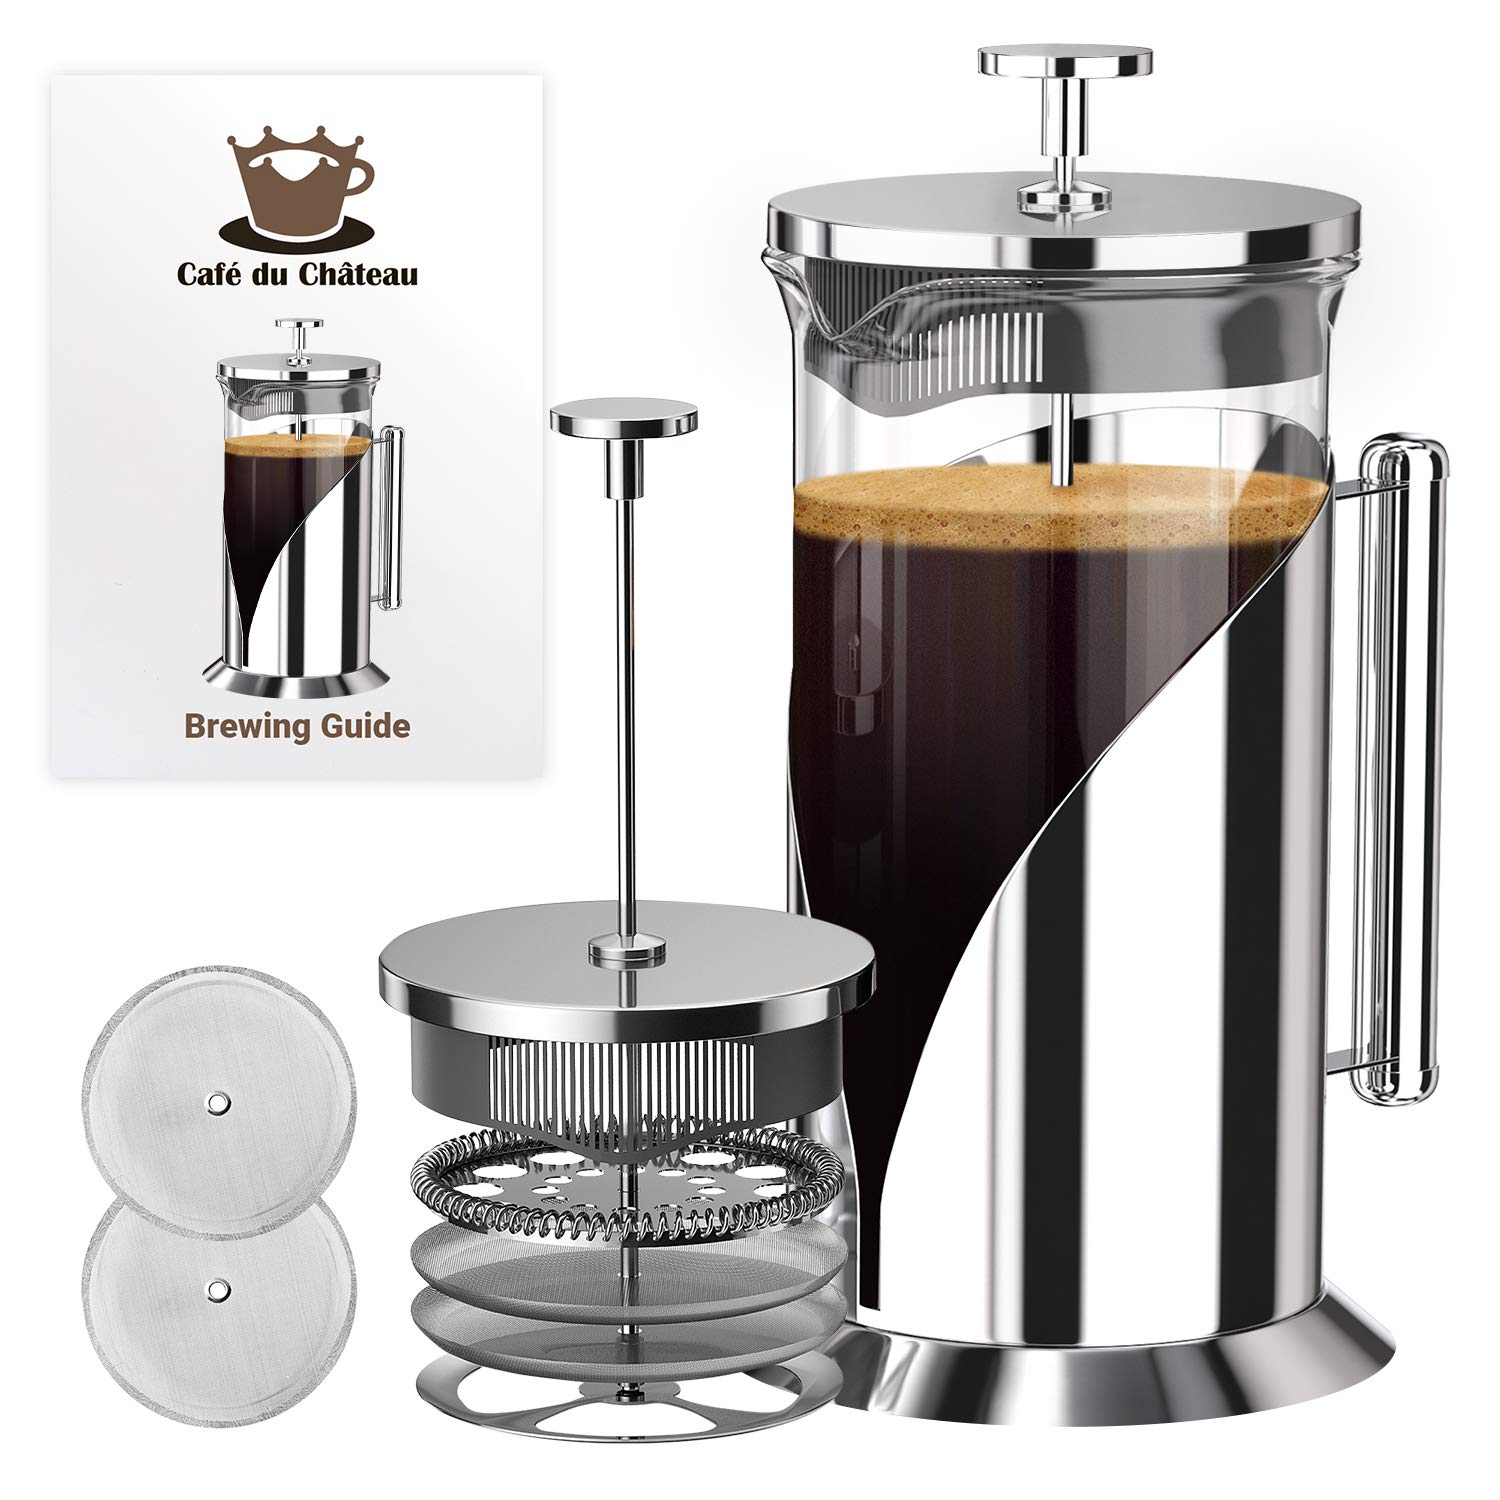 Book Cover Cafe Du Chateau The Original Glass French Press Coffee Maker Versatile Coffee Press, Tea Press w/ 4 Level Filtration, BPA Free French Press Stainless Steel Coffee Maker (34oz)